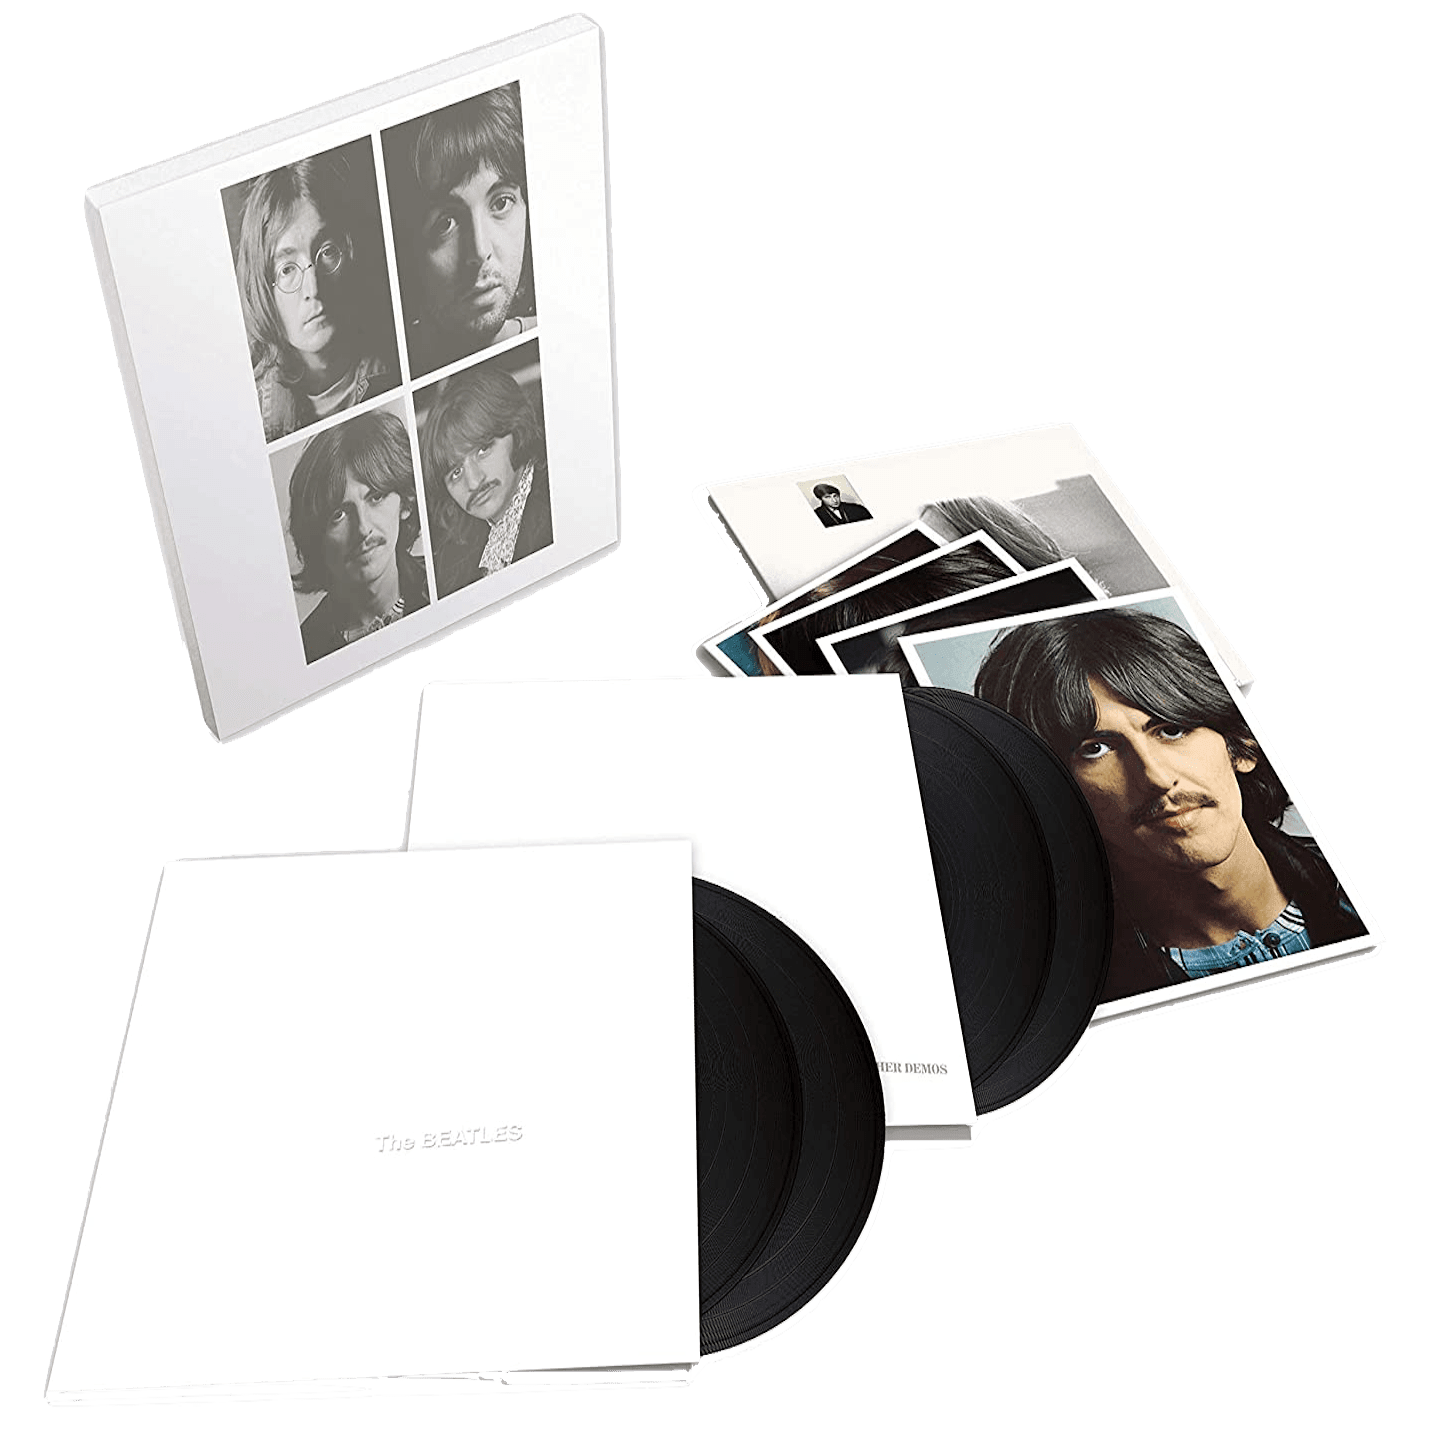 The Beatles - The Beatles (The White Album) + Esher Demos (Limited Edition, Remastered, 180 Gram) (4 LP) - Joco Records